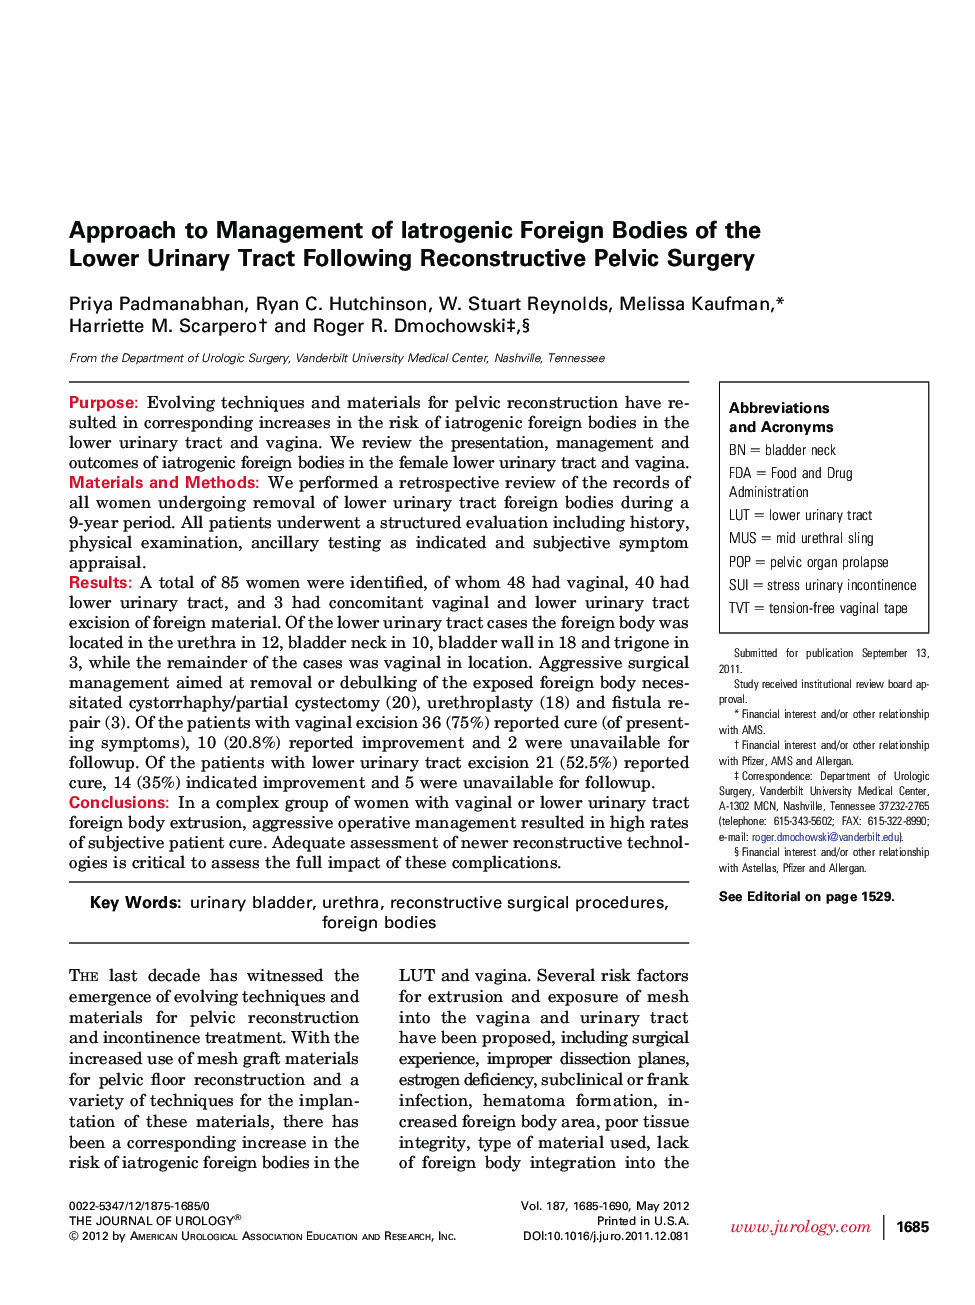 Approach to Management of Iatrogenic Foreign Bodies of the Lower Urinary Tract Following Reconstructive Pelvic Surgery 